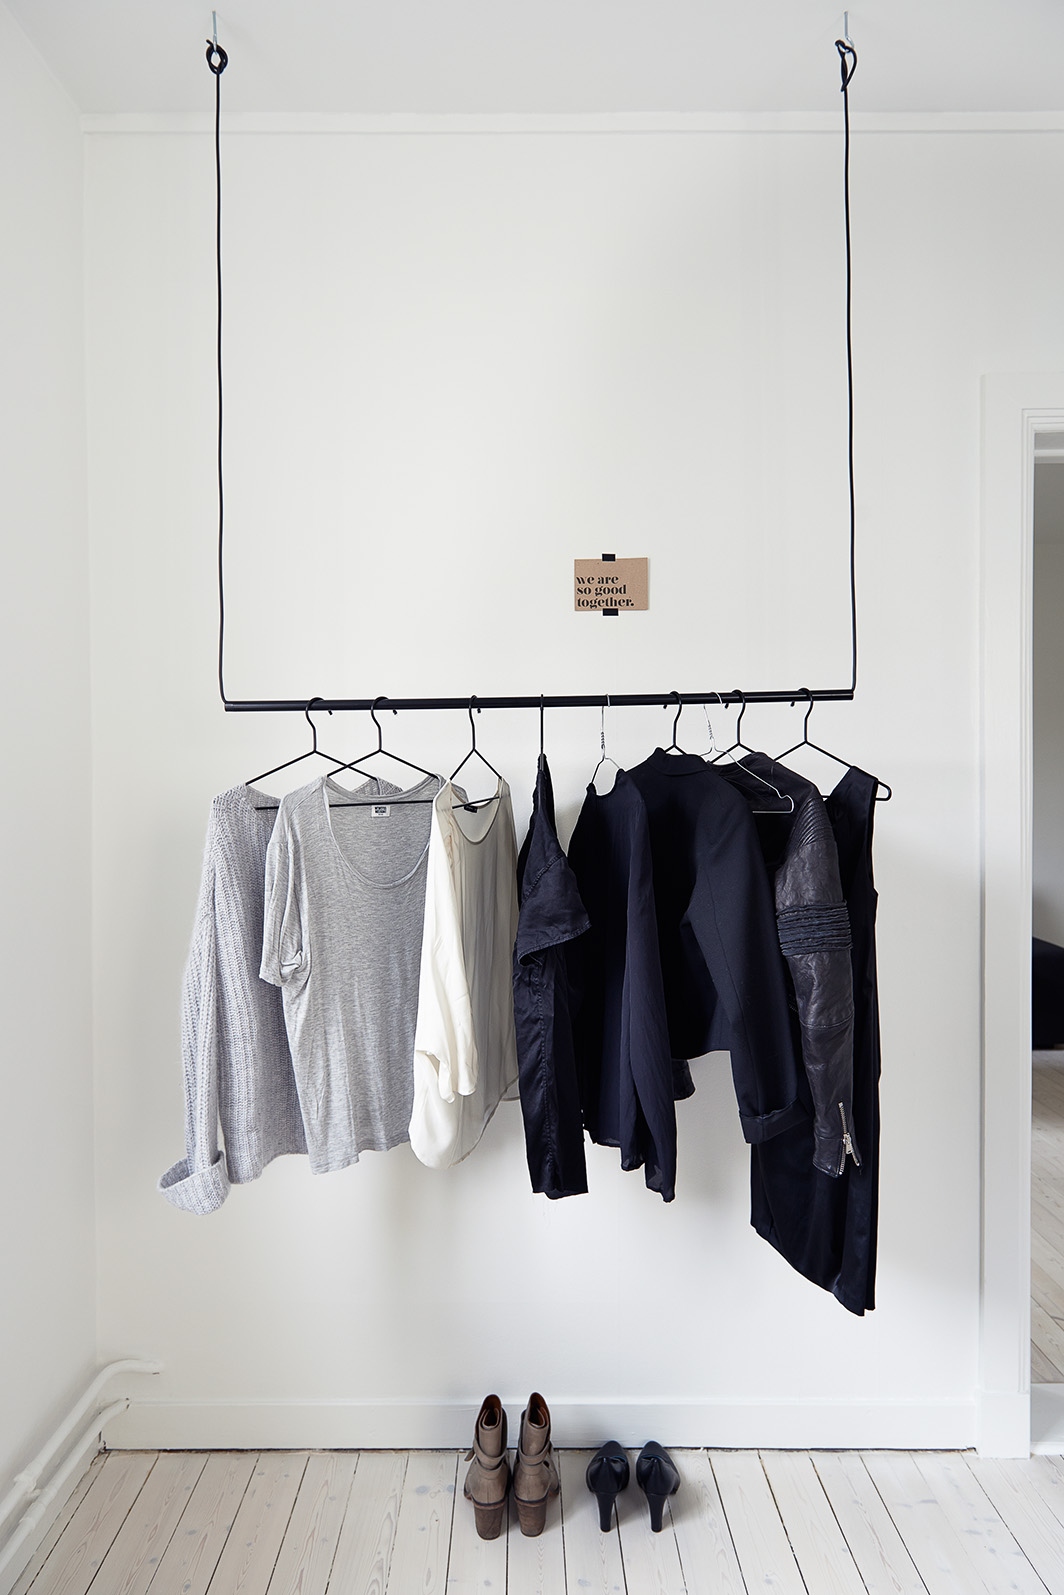 hanging clothes rack from ceiling